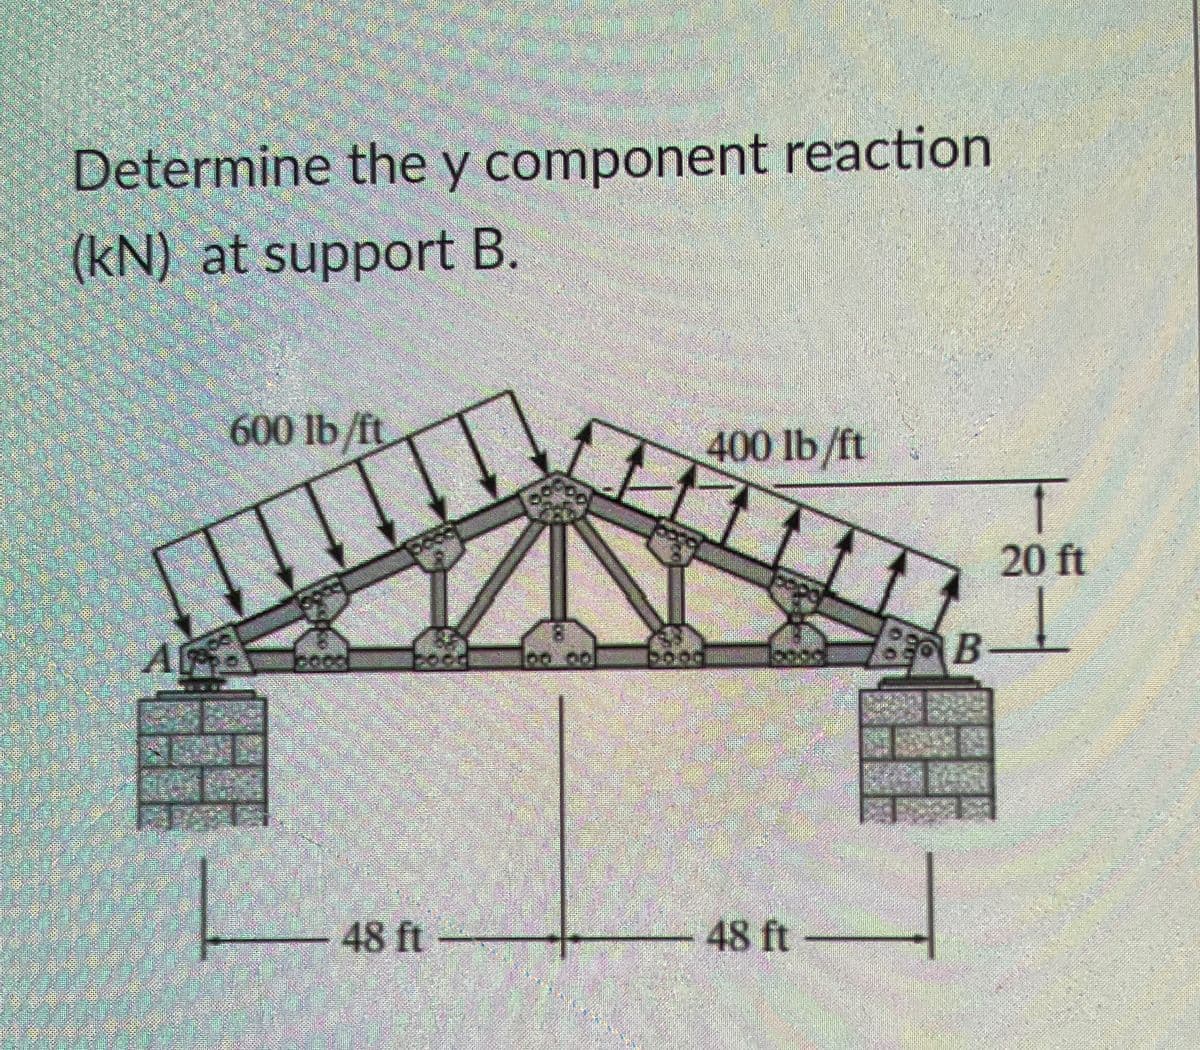 Determine the y component reaction
(kN) at support B.
600 lb/ft
400 lb/ft
20 ft
SB-
48 ft-
48 ft
